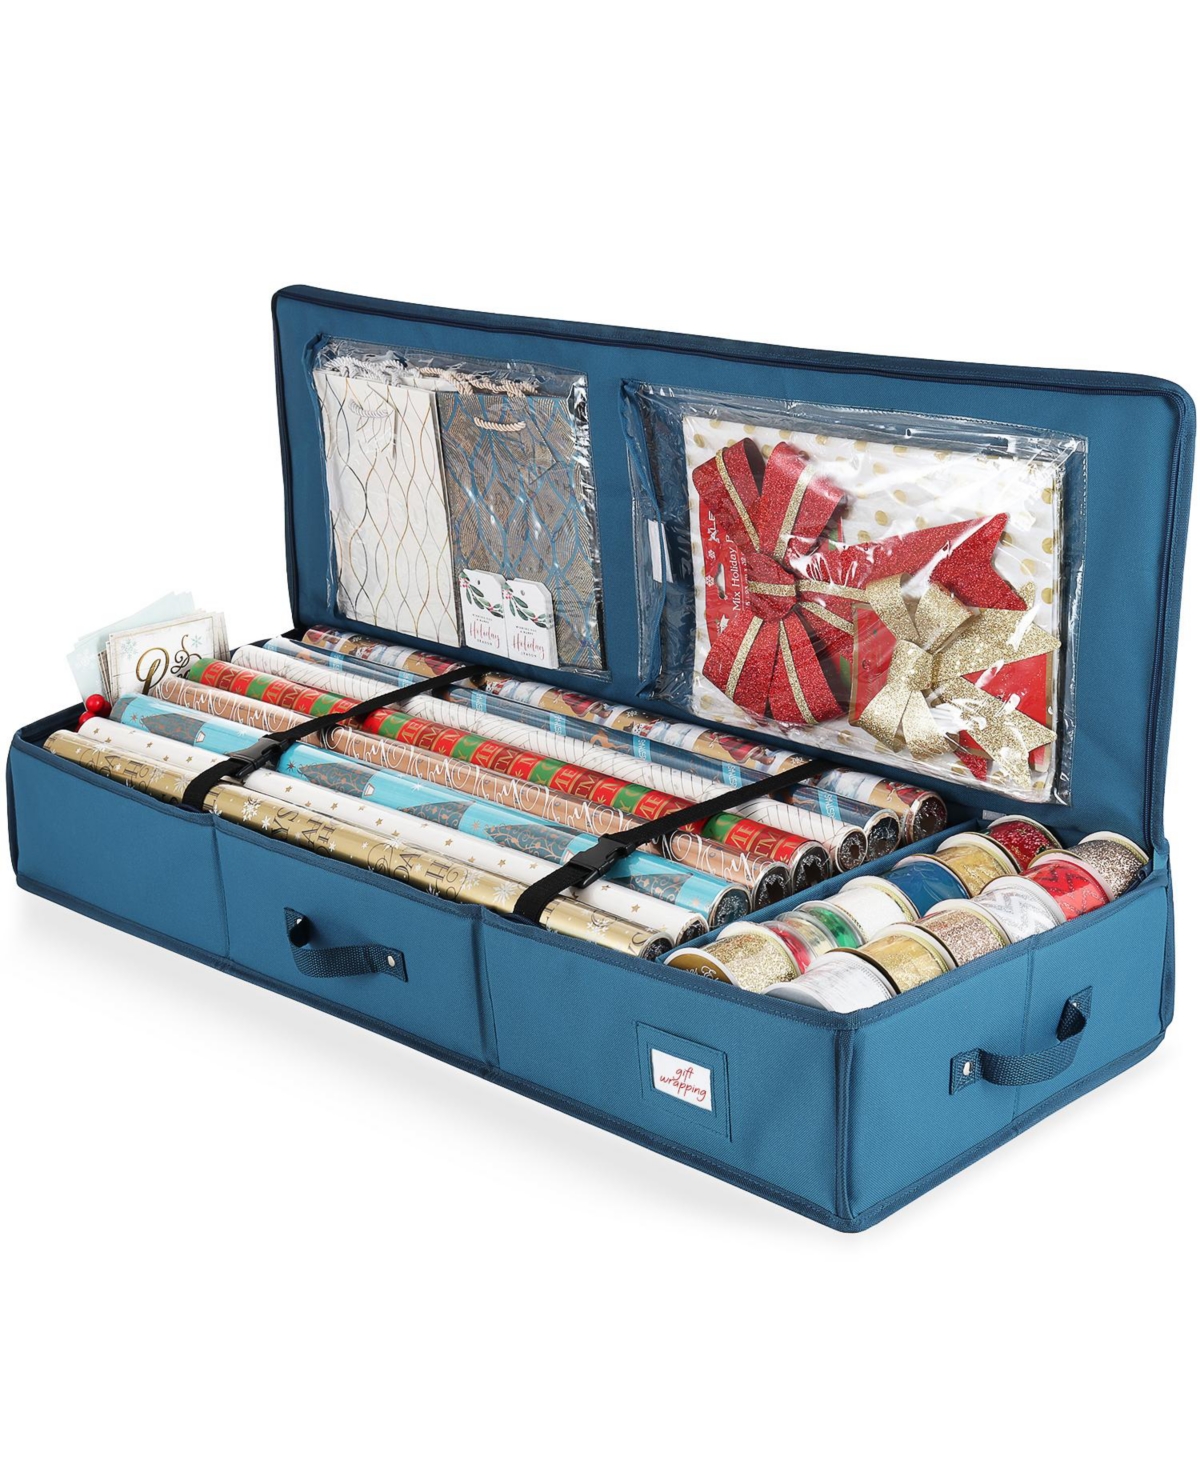 Premium Holiday Gift Wrapping Paper & Accessories Storage Box - Fits Up to 22 Rolls of 40" - Blue